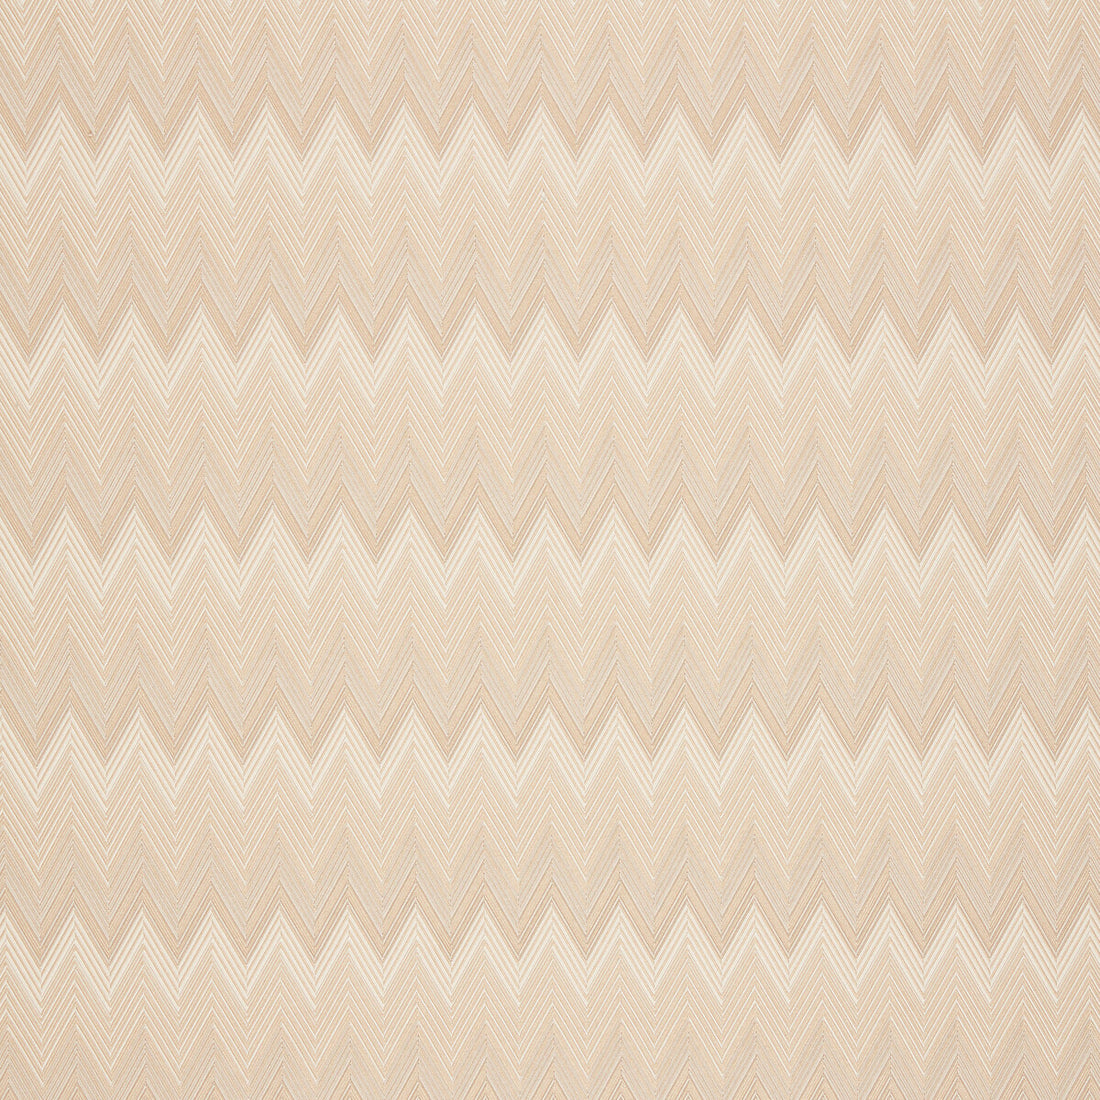 Brest Fr fabric in 481 color - pattern 36713.16.0 - by Kravet Couture in the Missoni Home collection